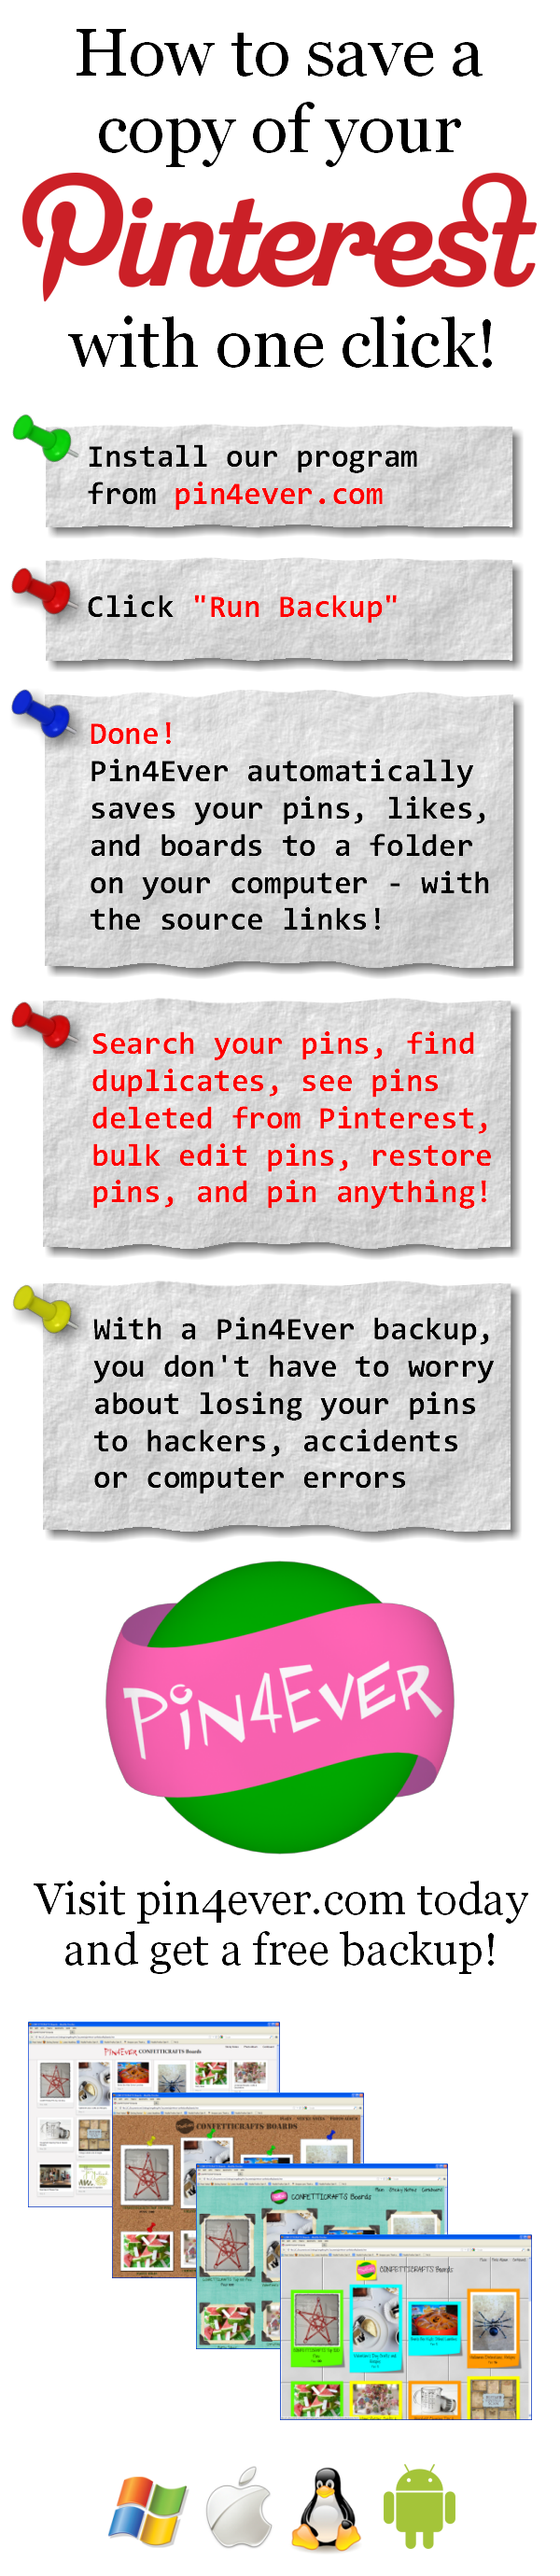 Are your pins protected? Pin4Ever has saved, edited or uploaded 476,482,802 pins since September 2012. Go to pin4ever.com and try it free!